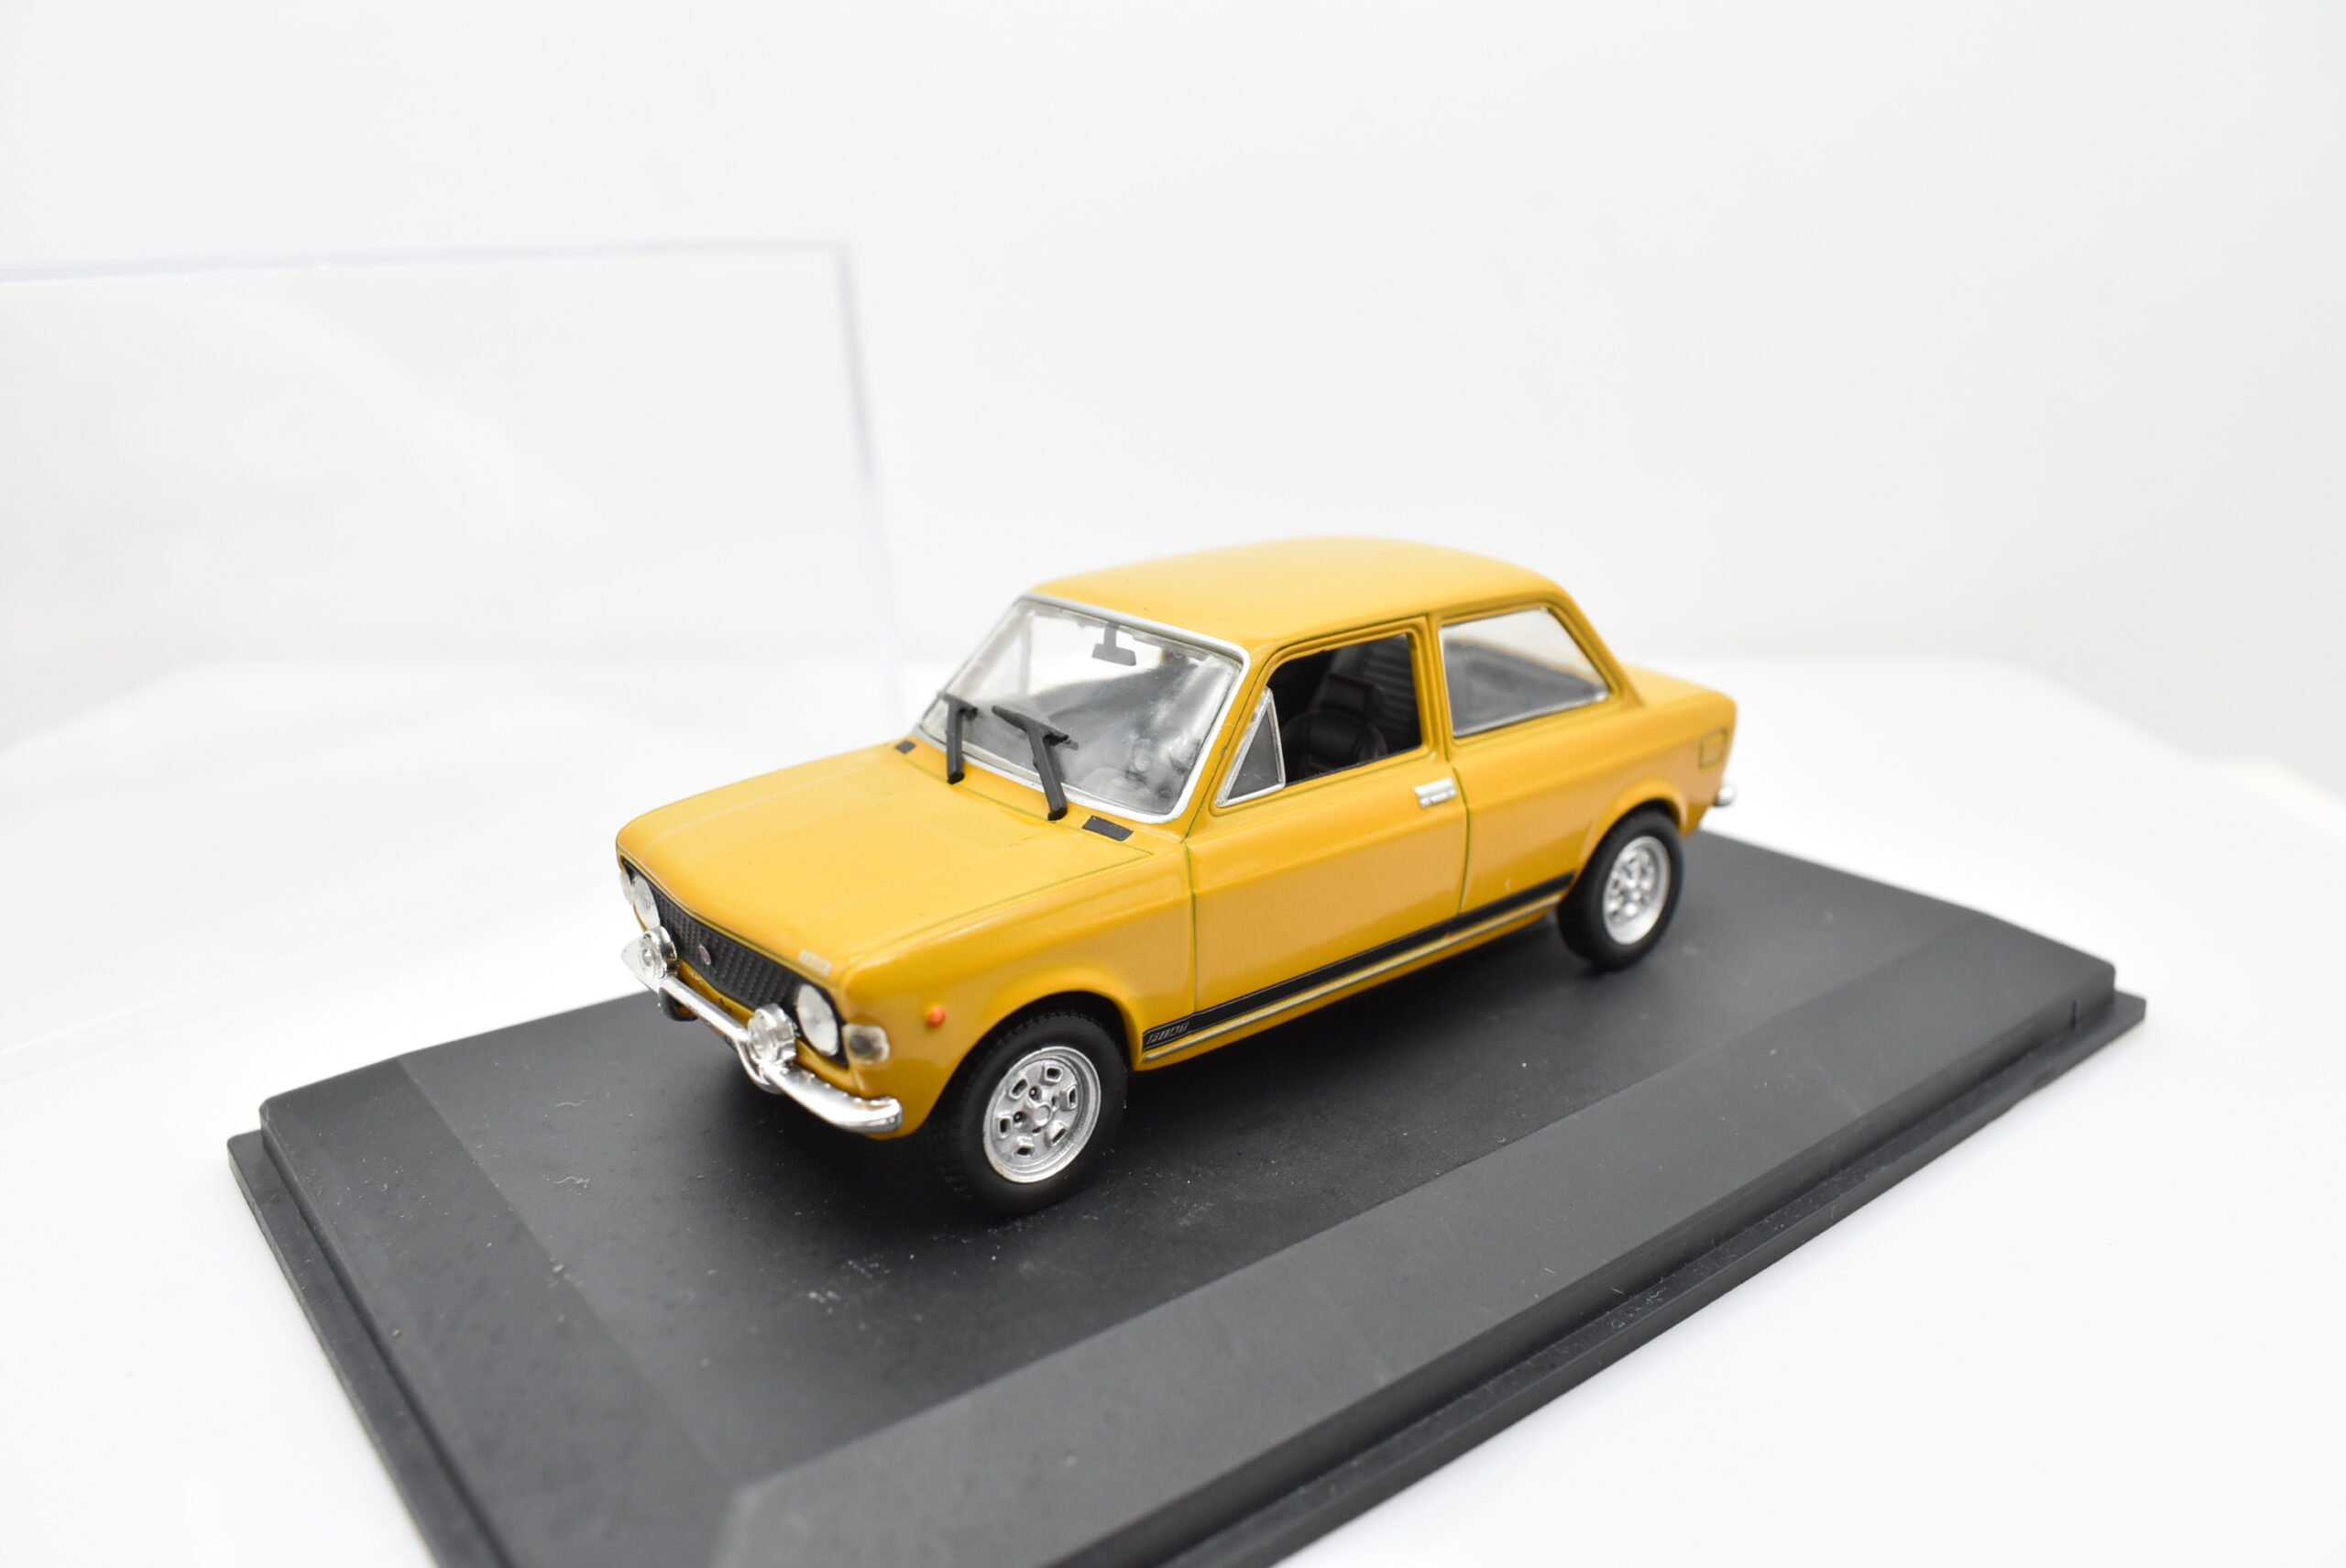 Model car 1:43 scale Fiat 128 Rally diecast vehiclescollection Norev yn